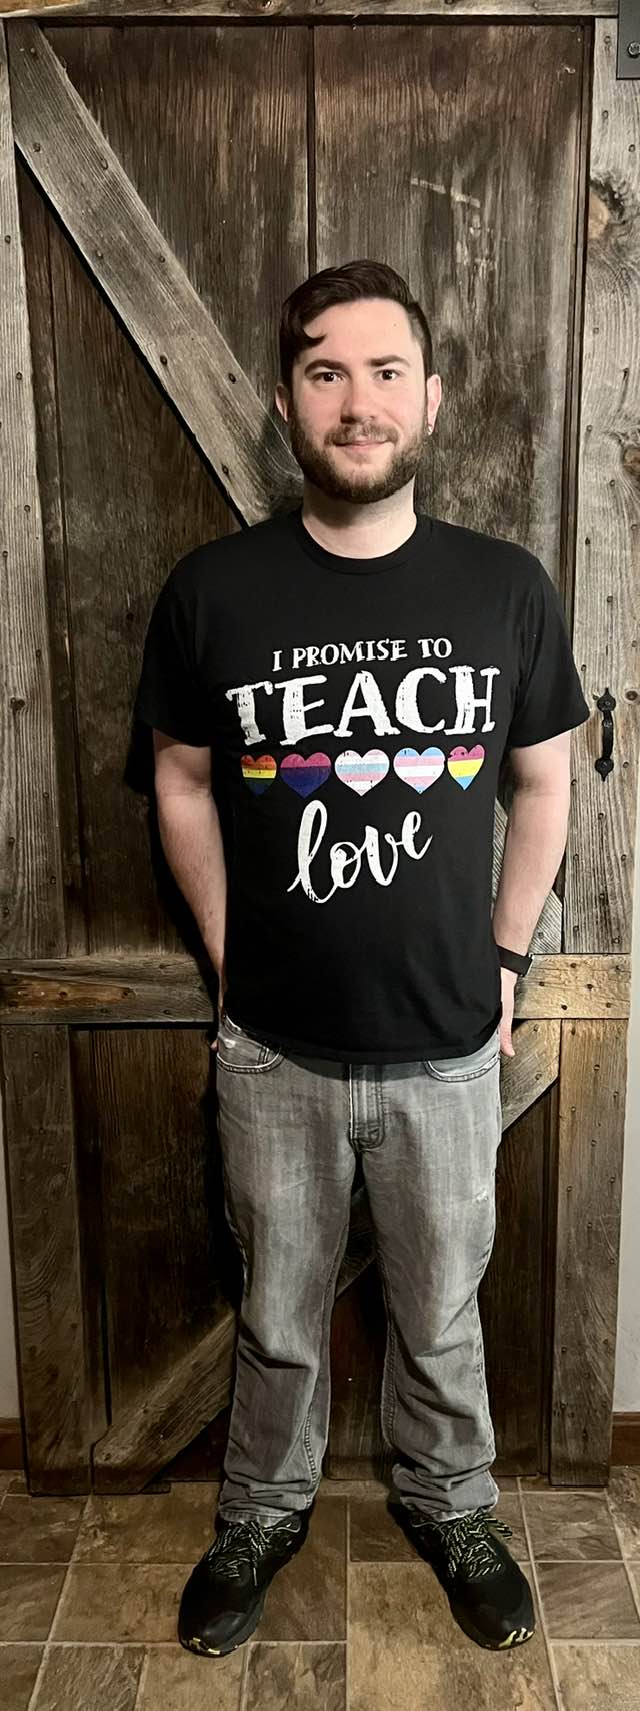 Ben wearing a shirt that says I promise to teach love